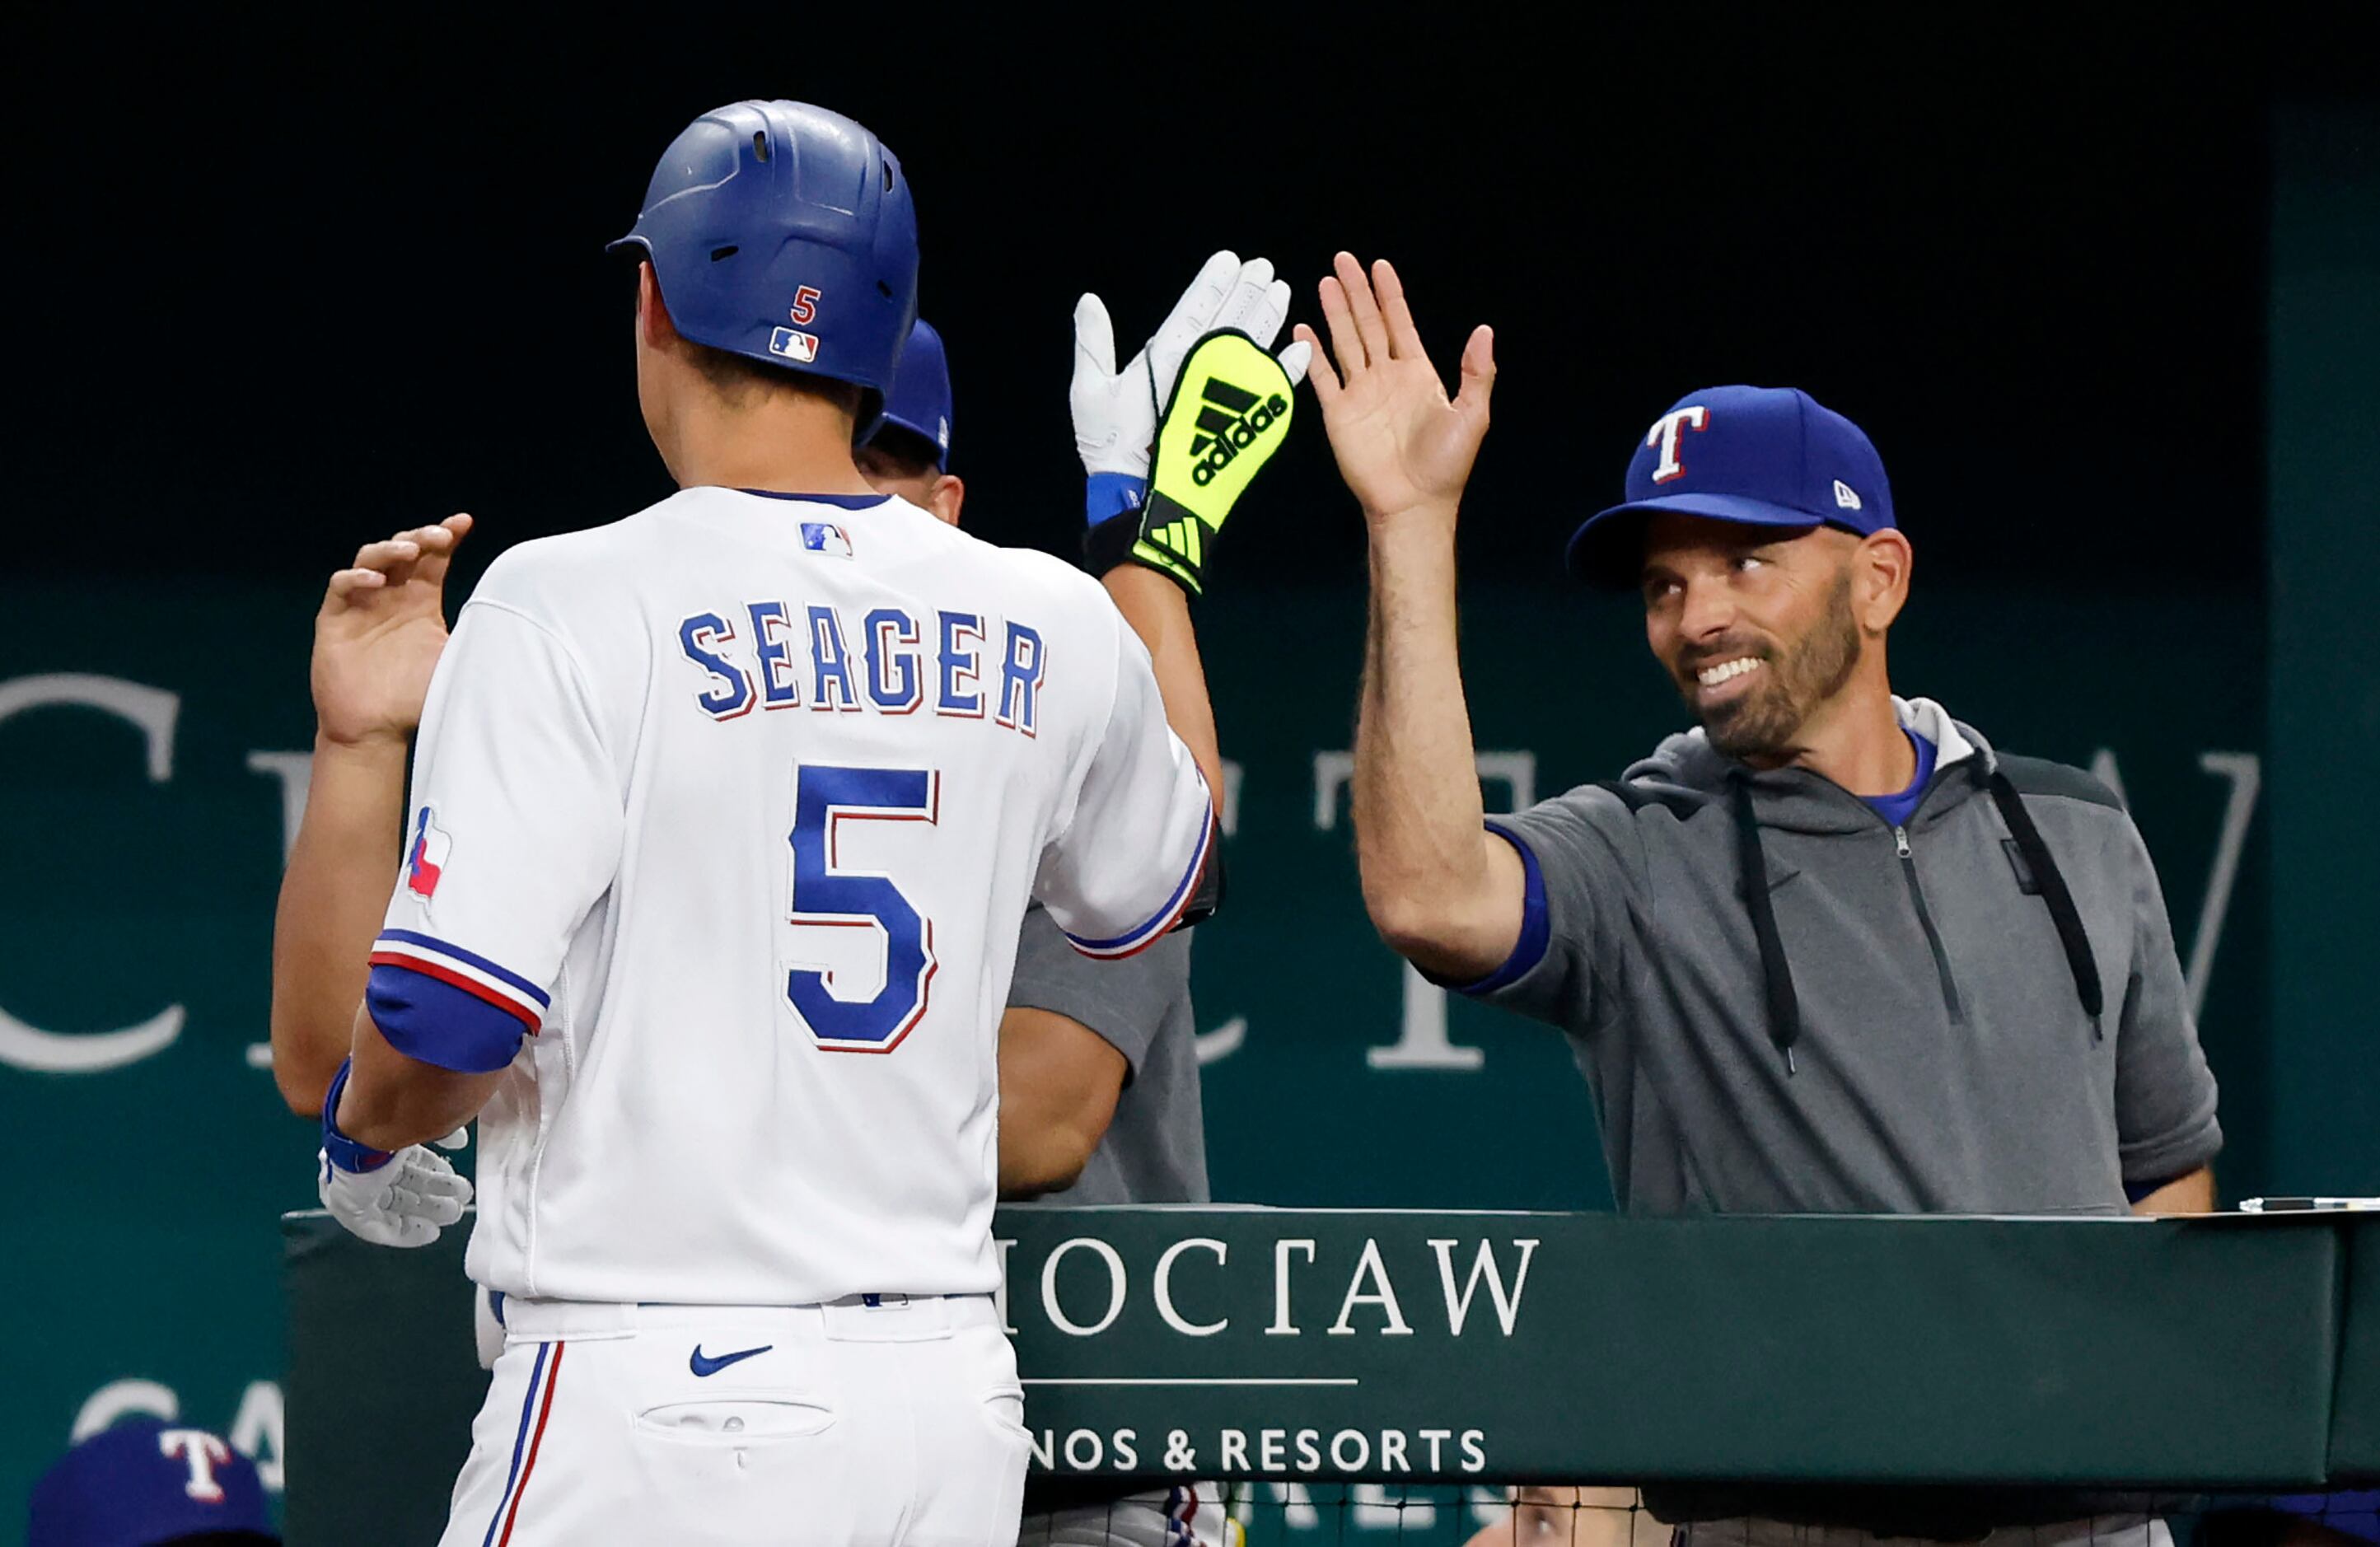 After an unfamiliar debut with Rangers, Corey Seager is ready for his new  'normal